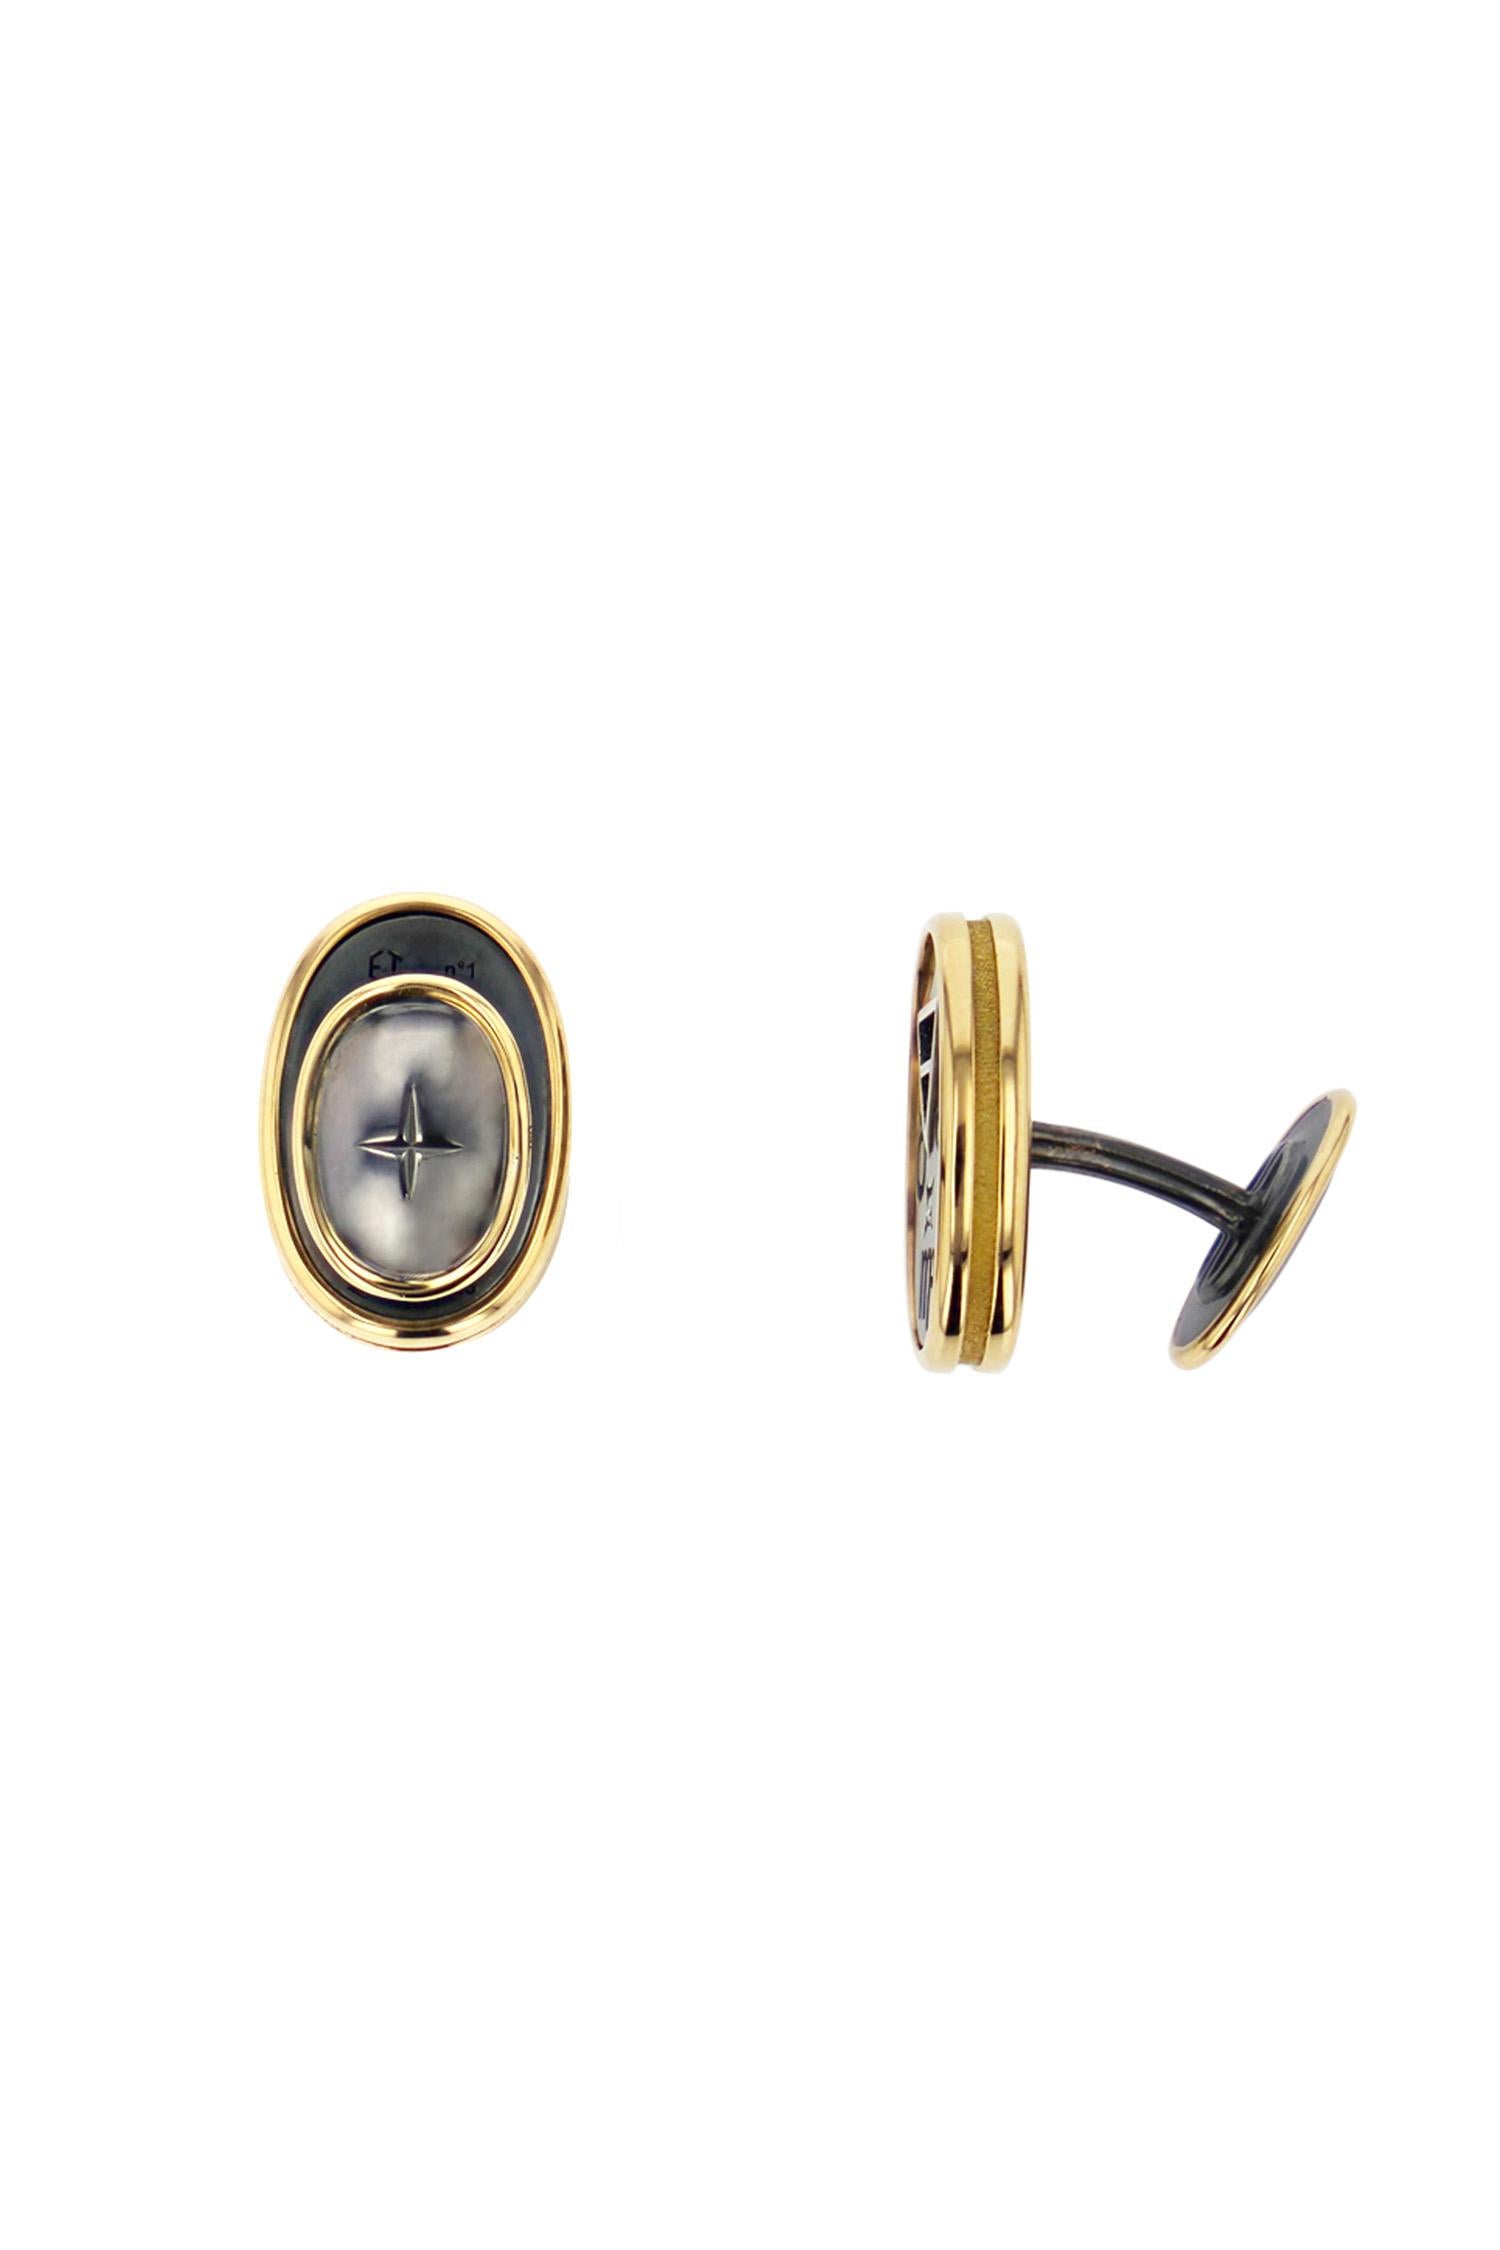 Cufflinks in yellow gold and distressed silver. On one side are engraved the signs of Earth (Virgo, Capricorn, Taurus) and on the other, a lion an onyx background.

Details:
Onyx
Diamond: 0.015 cts
18k Yellow Gold: 6.7 g
Distressed Silver: 7 g
Made